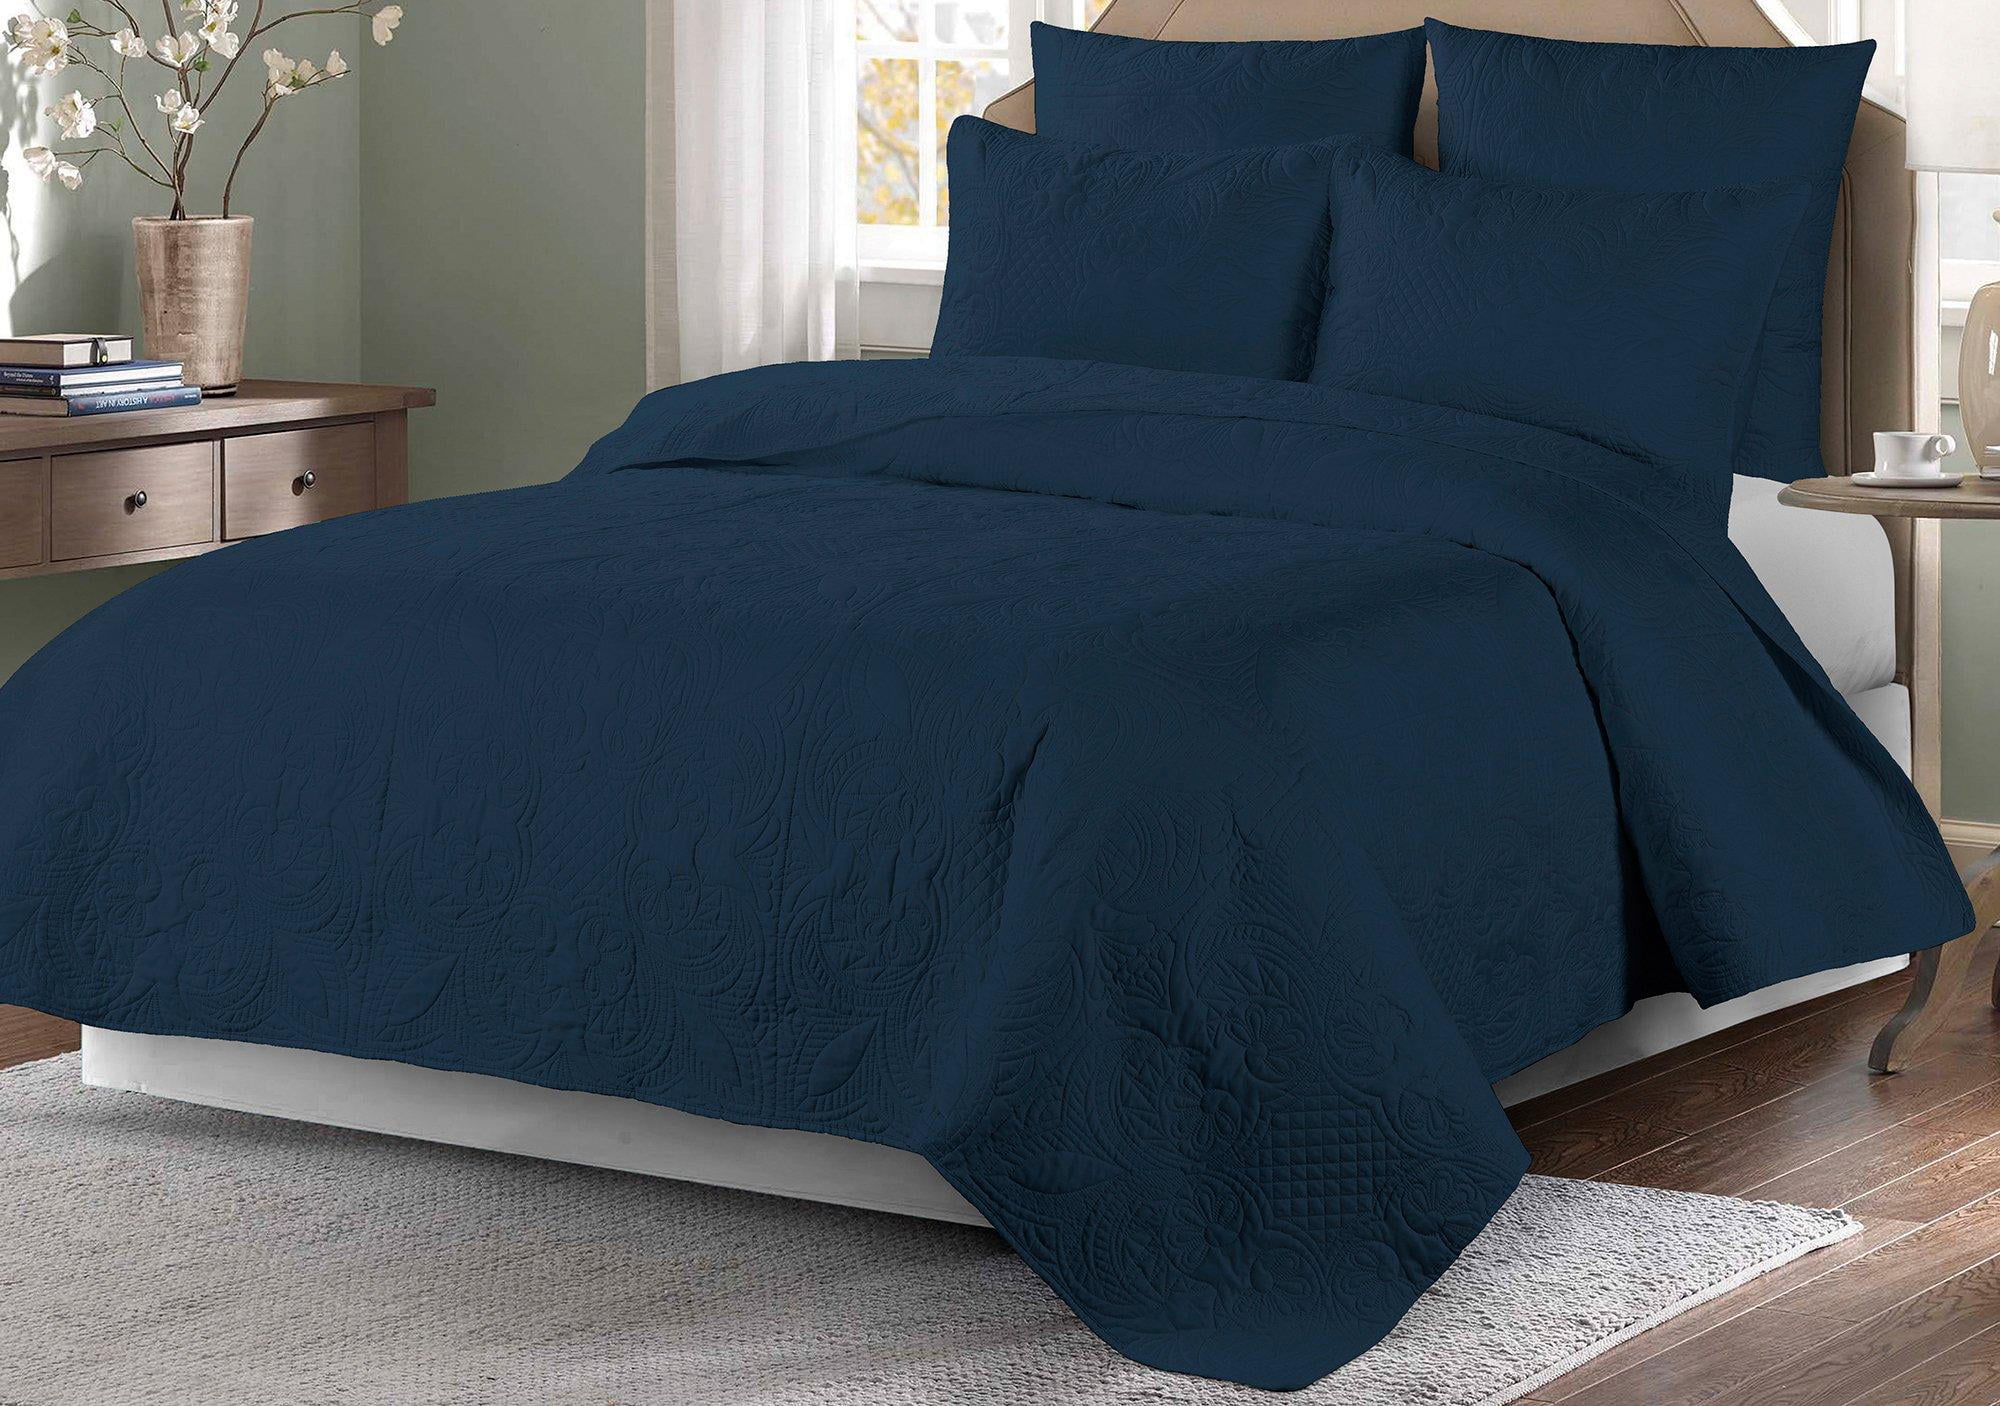 Details about   Glorious Bedding Sheet Set Deep Pocket Organic Cotton US Full Size All Solid 